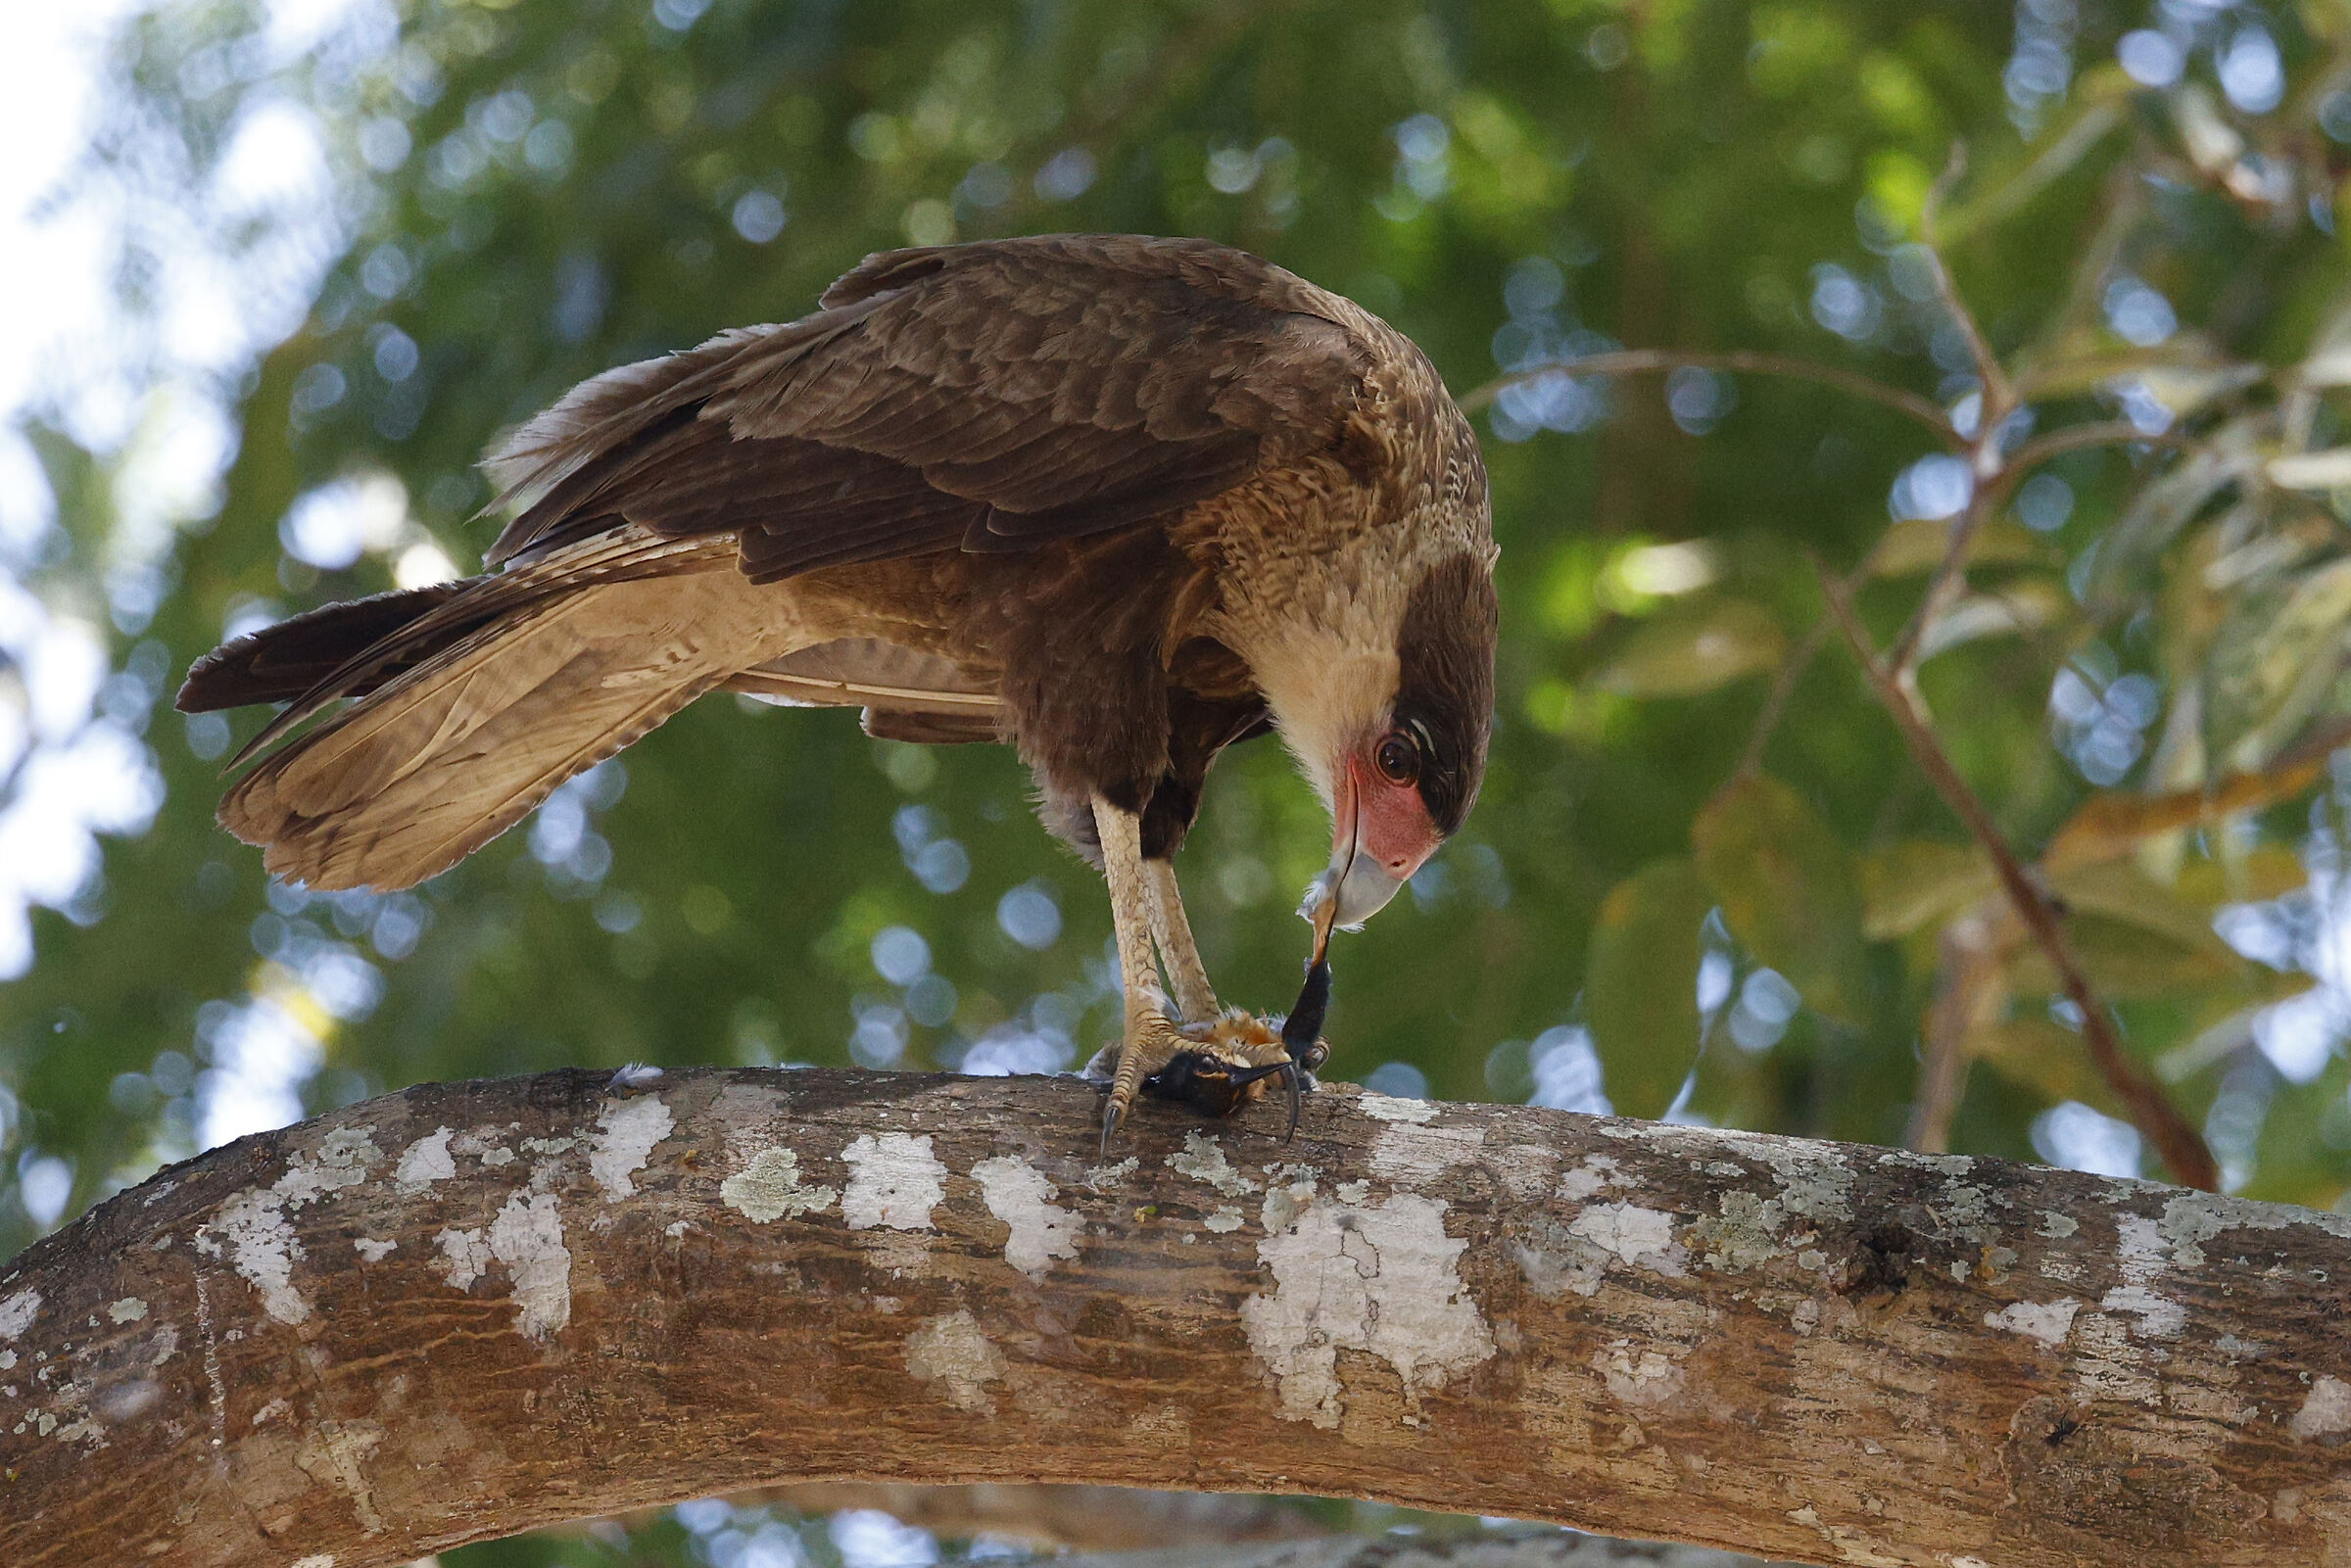 The meal of the Caracara...